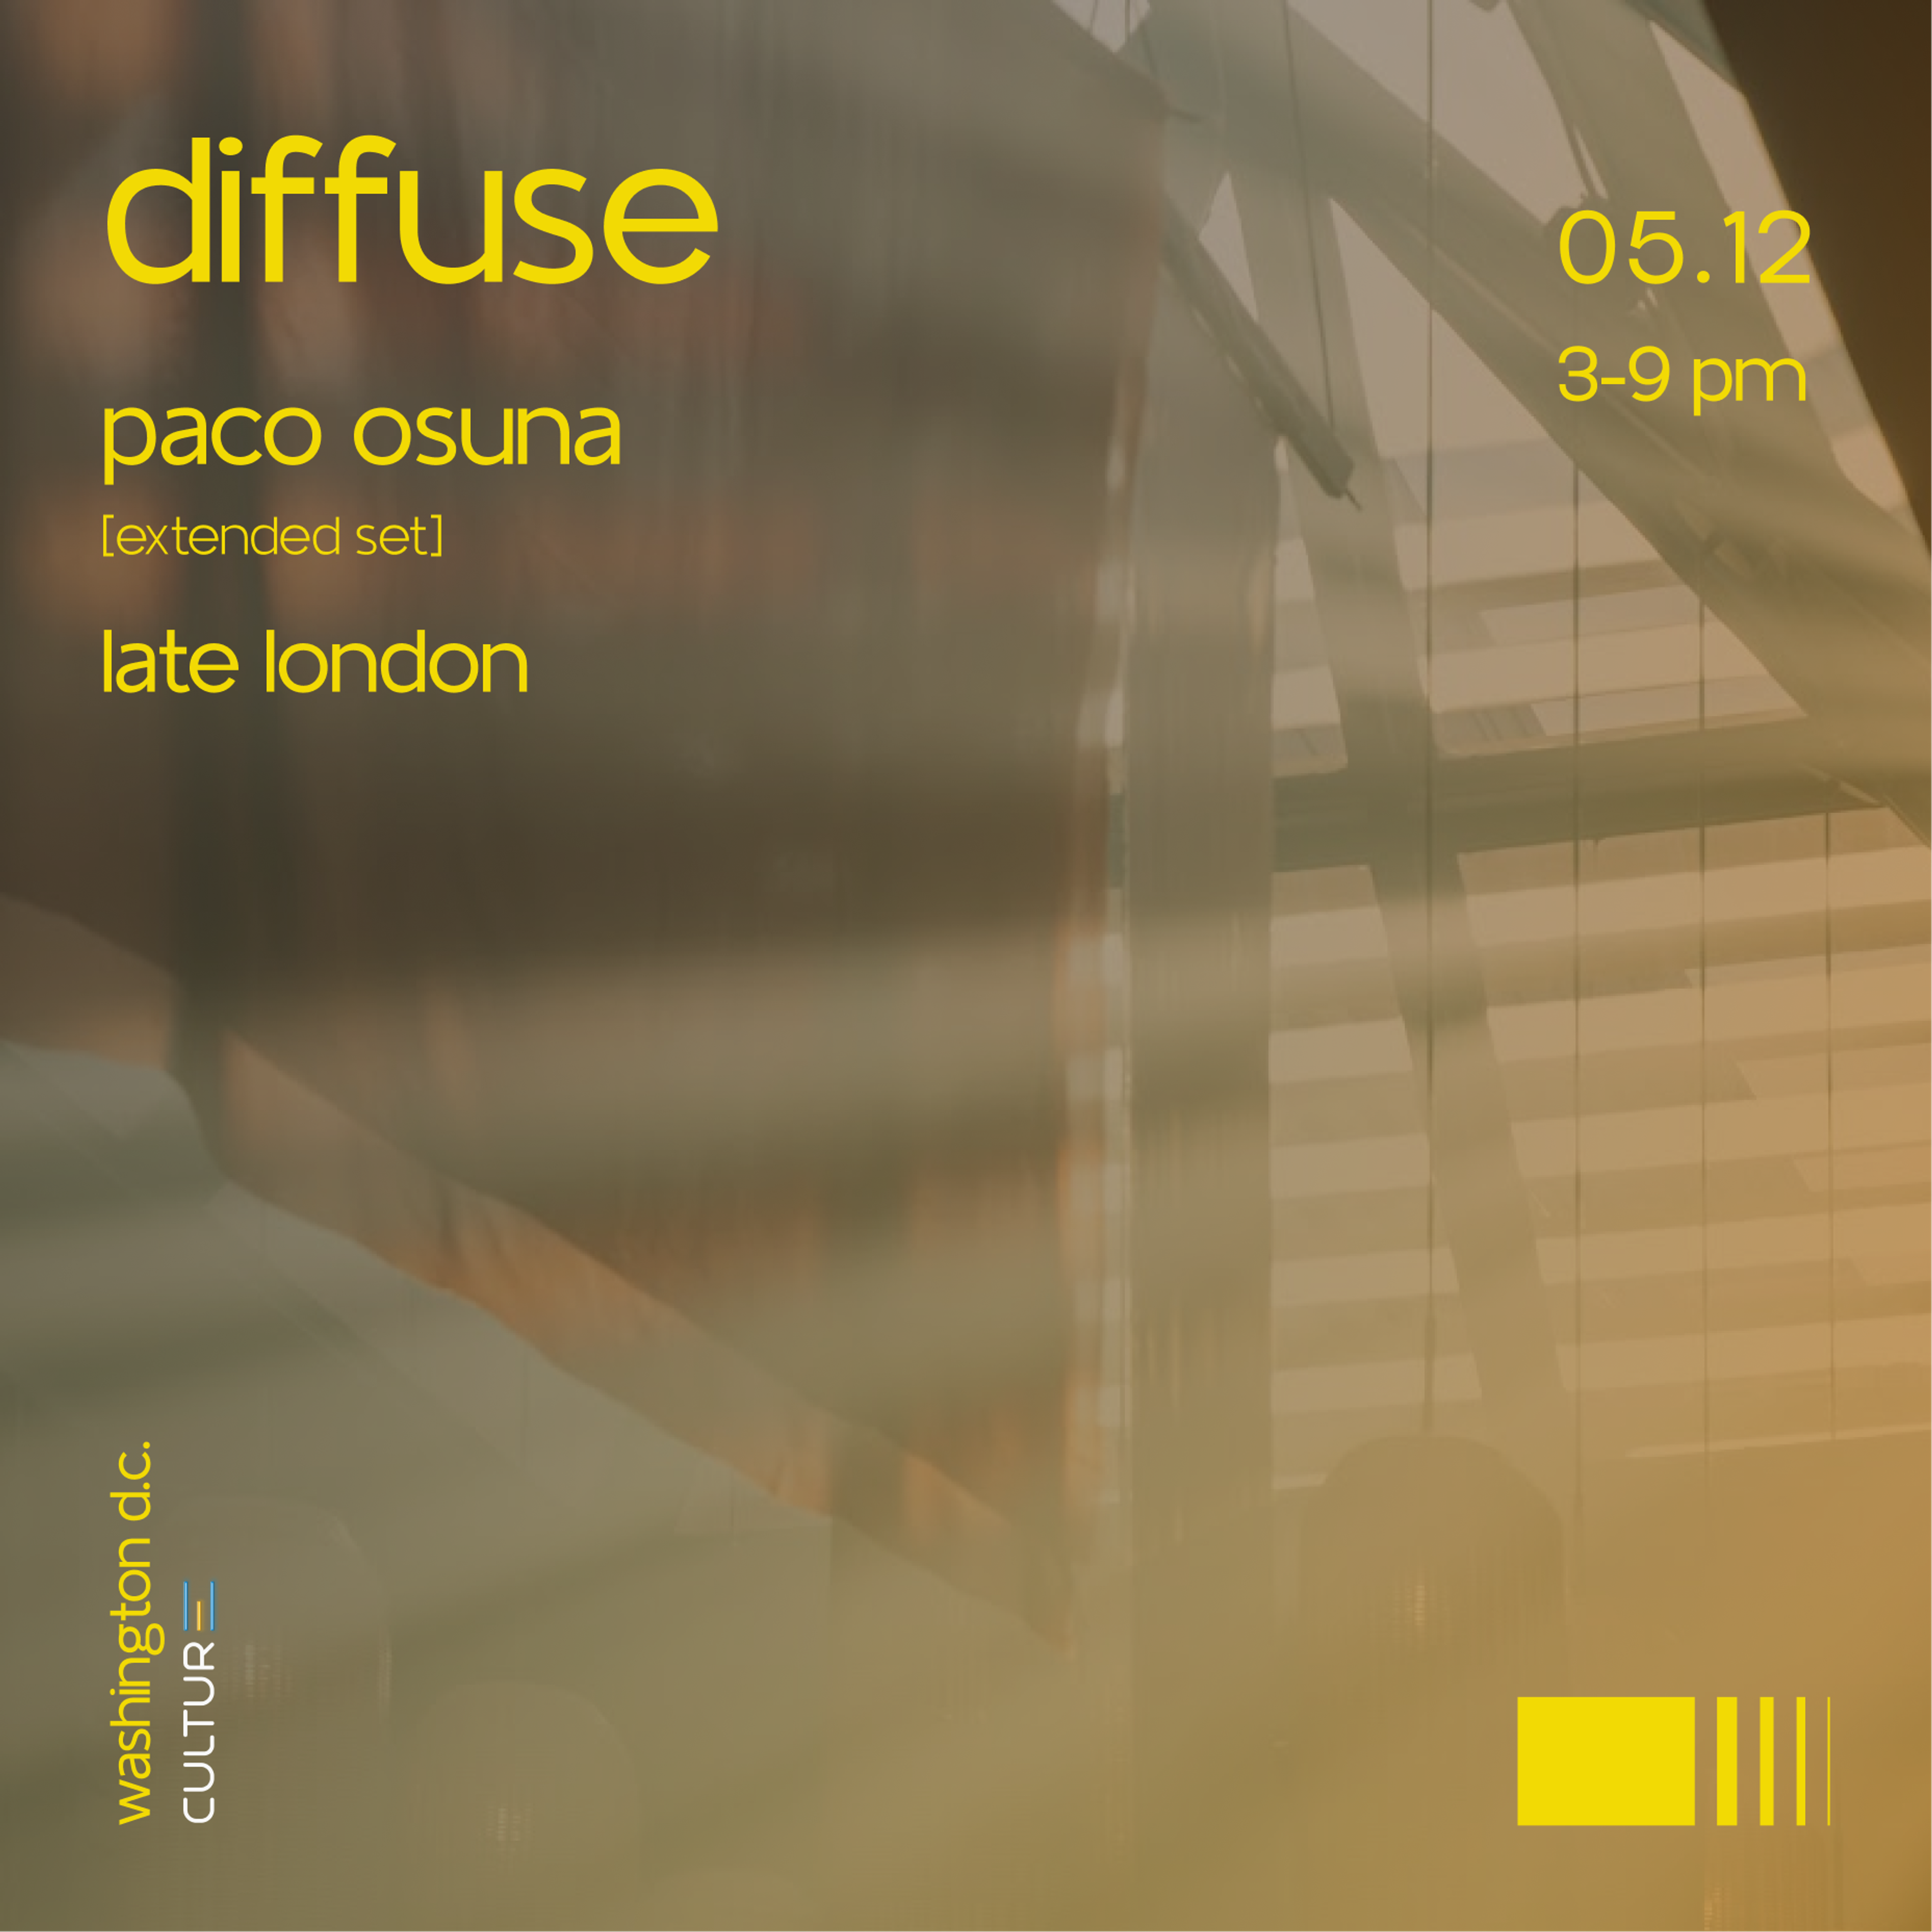 Flyer image for diffuse: paco osuna (extended set)